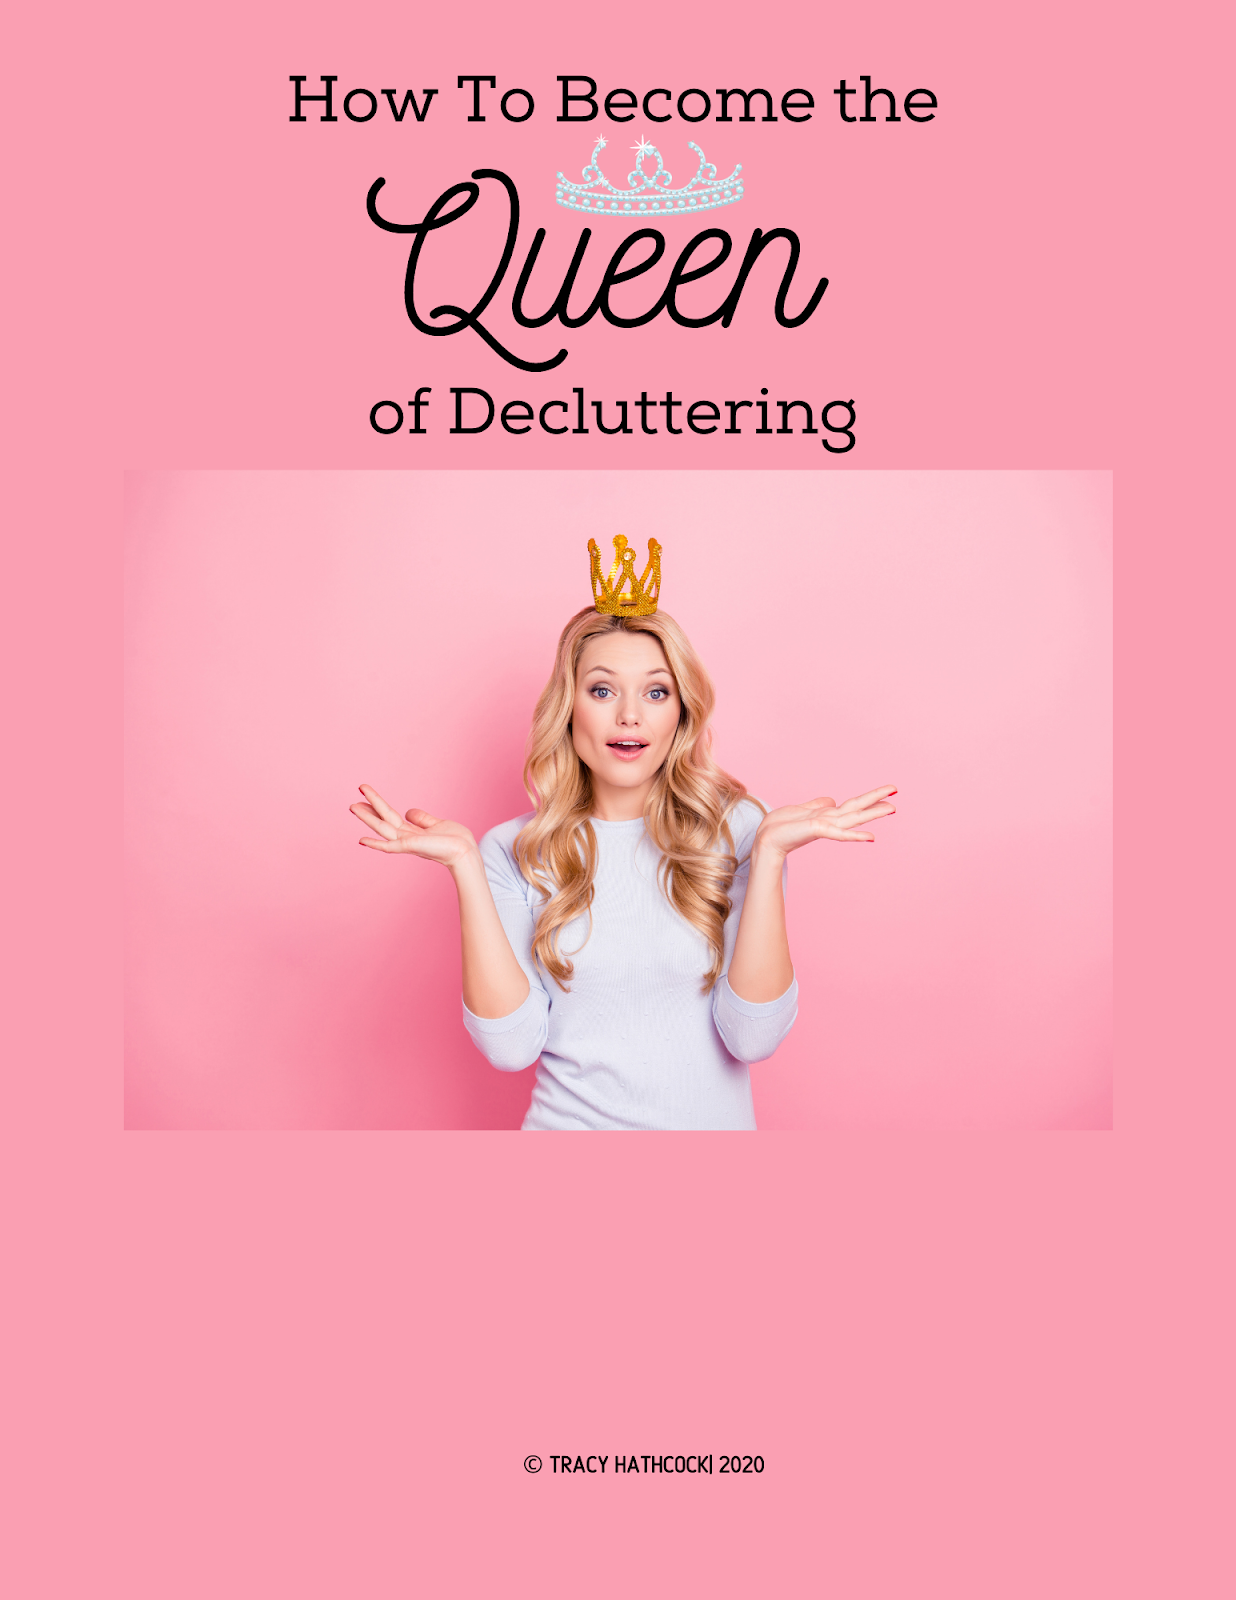 How To Become the Queen of Decluttering